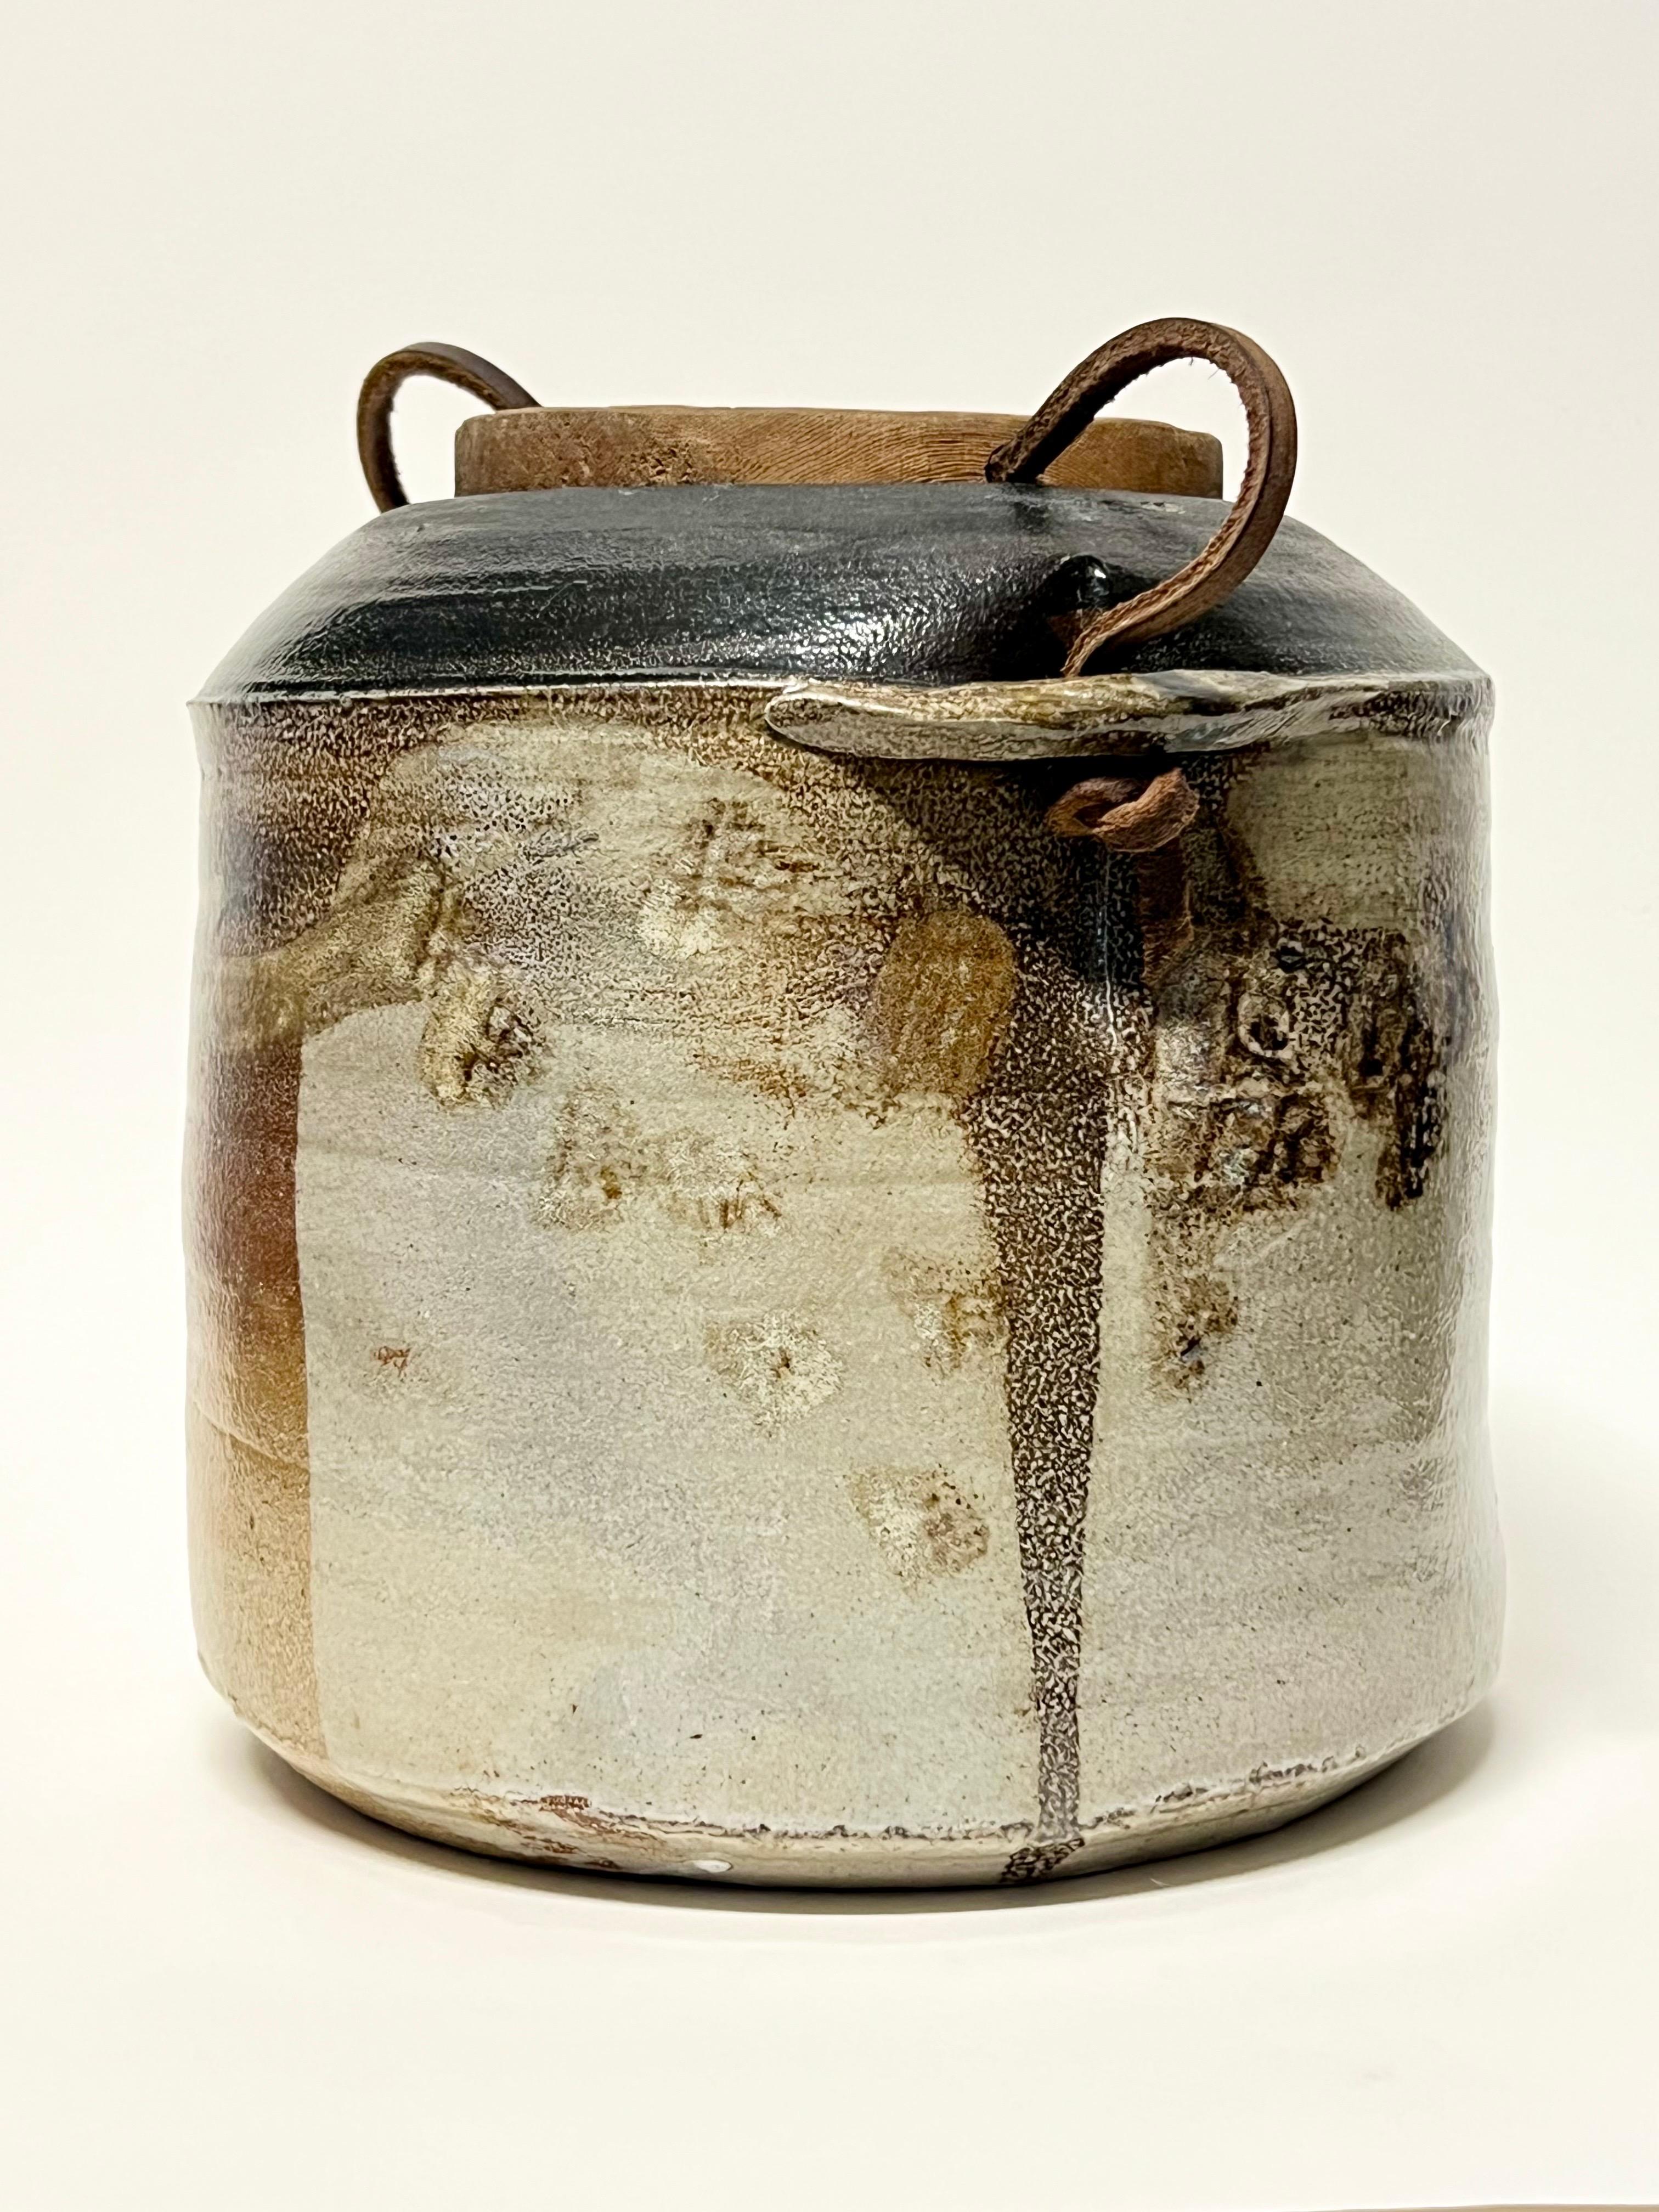 Amazing salt-fired lidded vessel by well listed potter, Sandra Johnstone c1970s. Johnstone (1936-1991) studied with Peter Voulkos at UC Berkeley in the 1950s. In addition Johnstone also studied with Paul Soldner. She eventually went on to build her